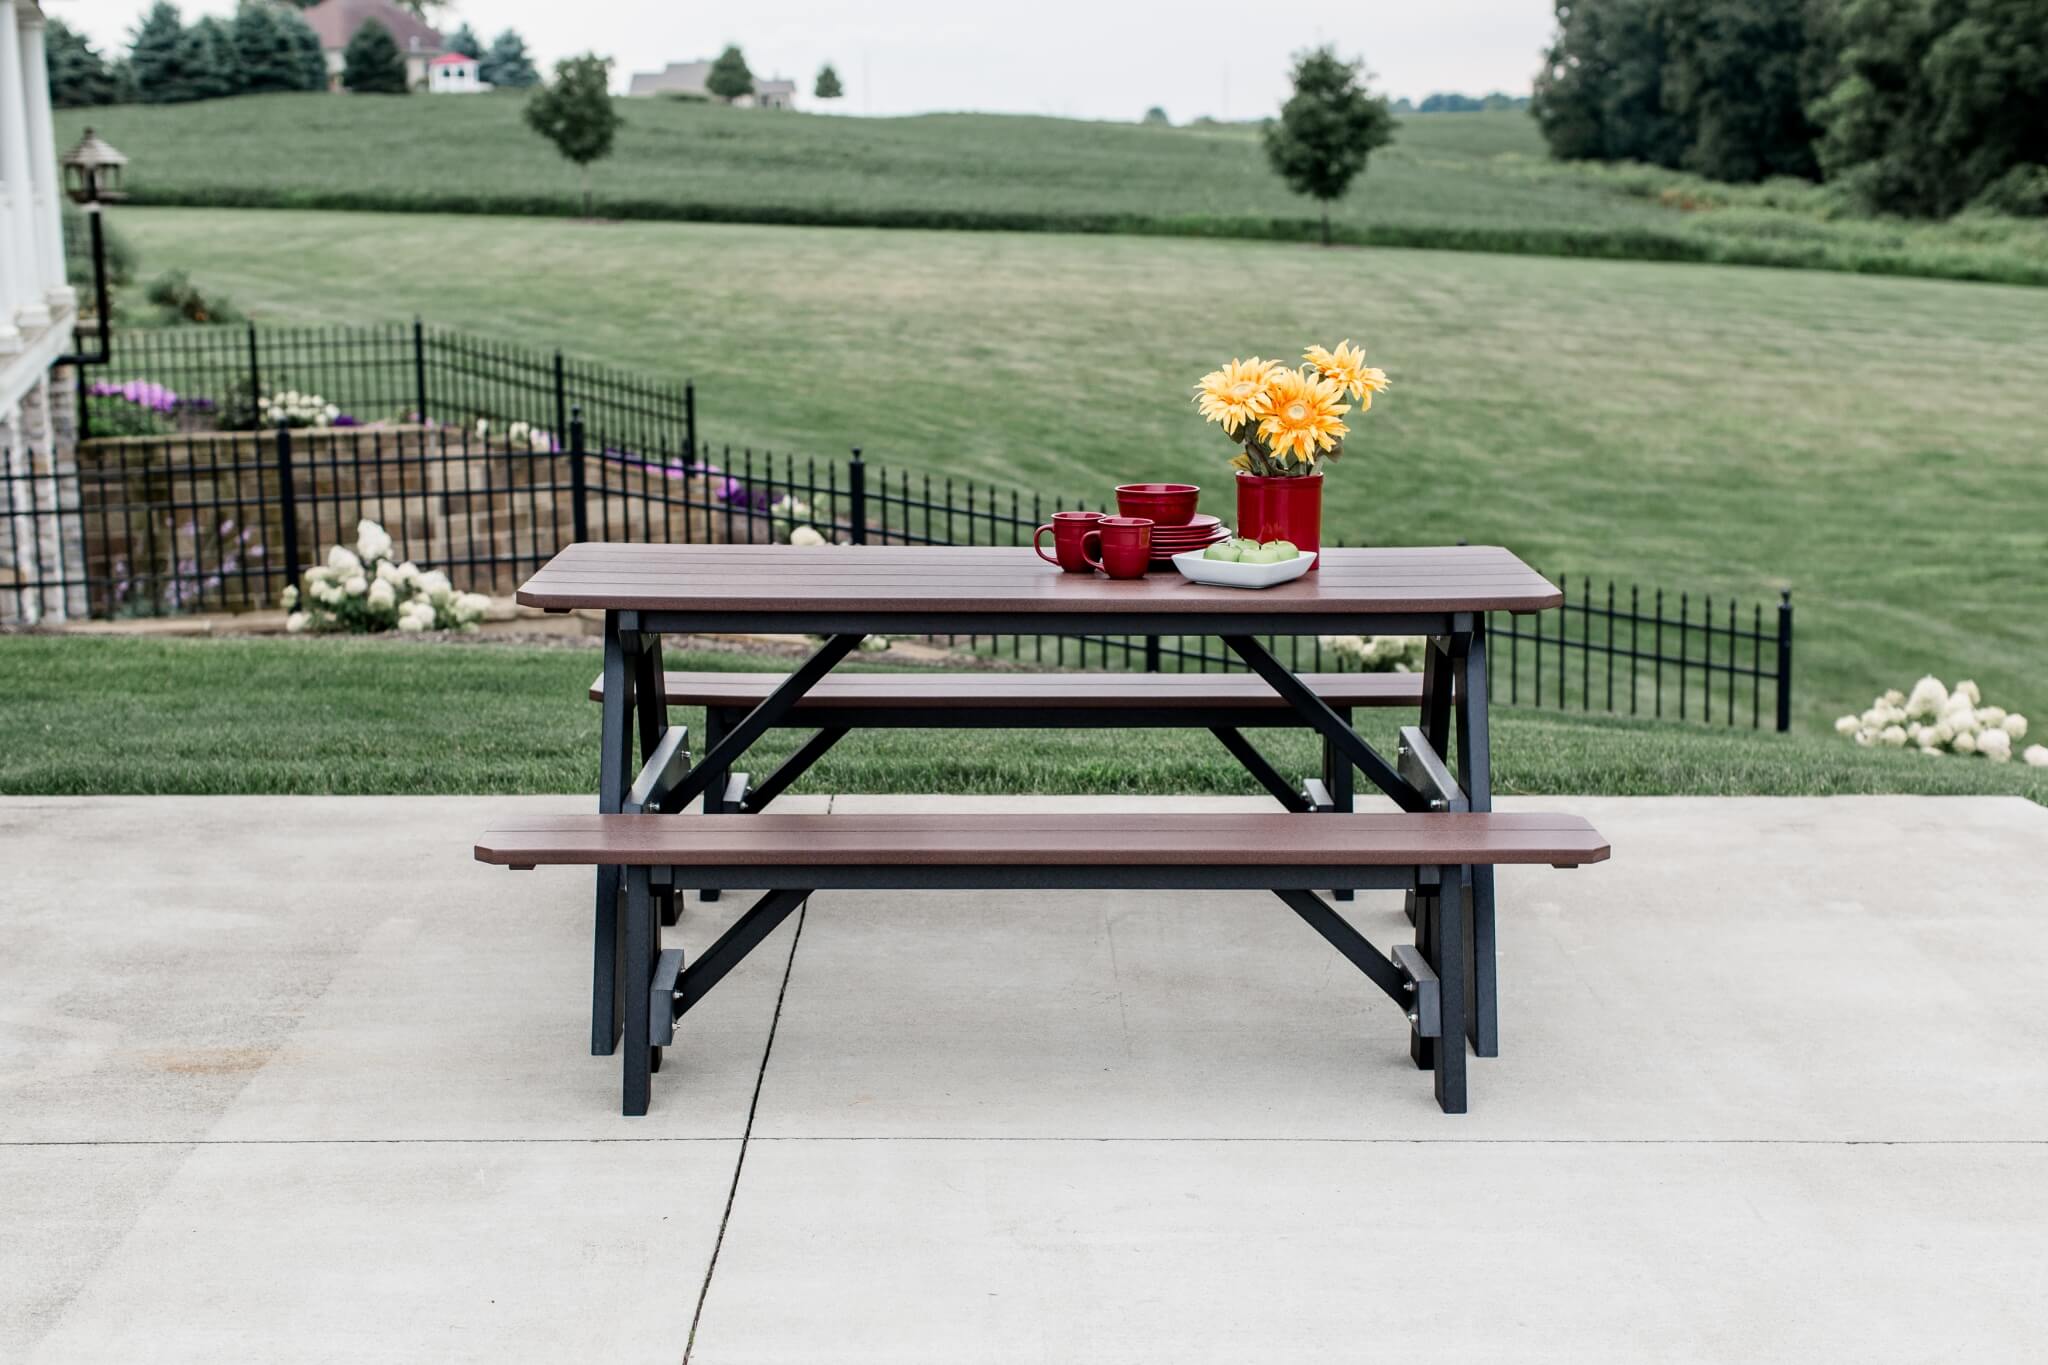 LCC-166 Picnic Table w/ Unattached Bench